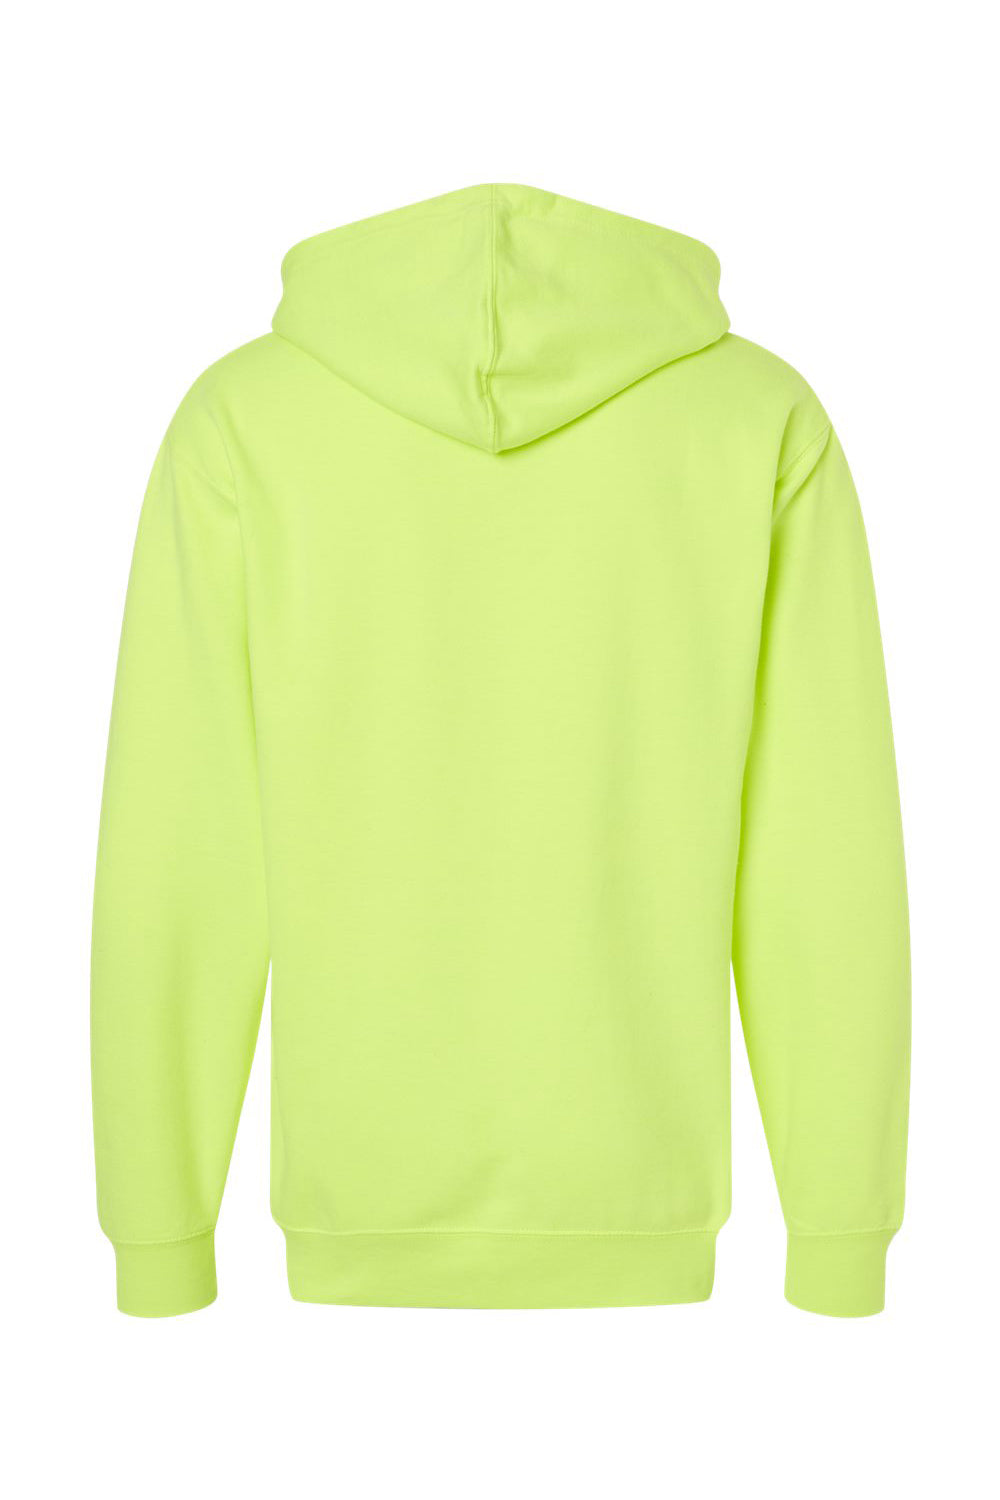 Independent Trading Co. SS4500Z Mens Full Zip Hooded Sweatshirt Hoodie Safety Yellow Flat Back